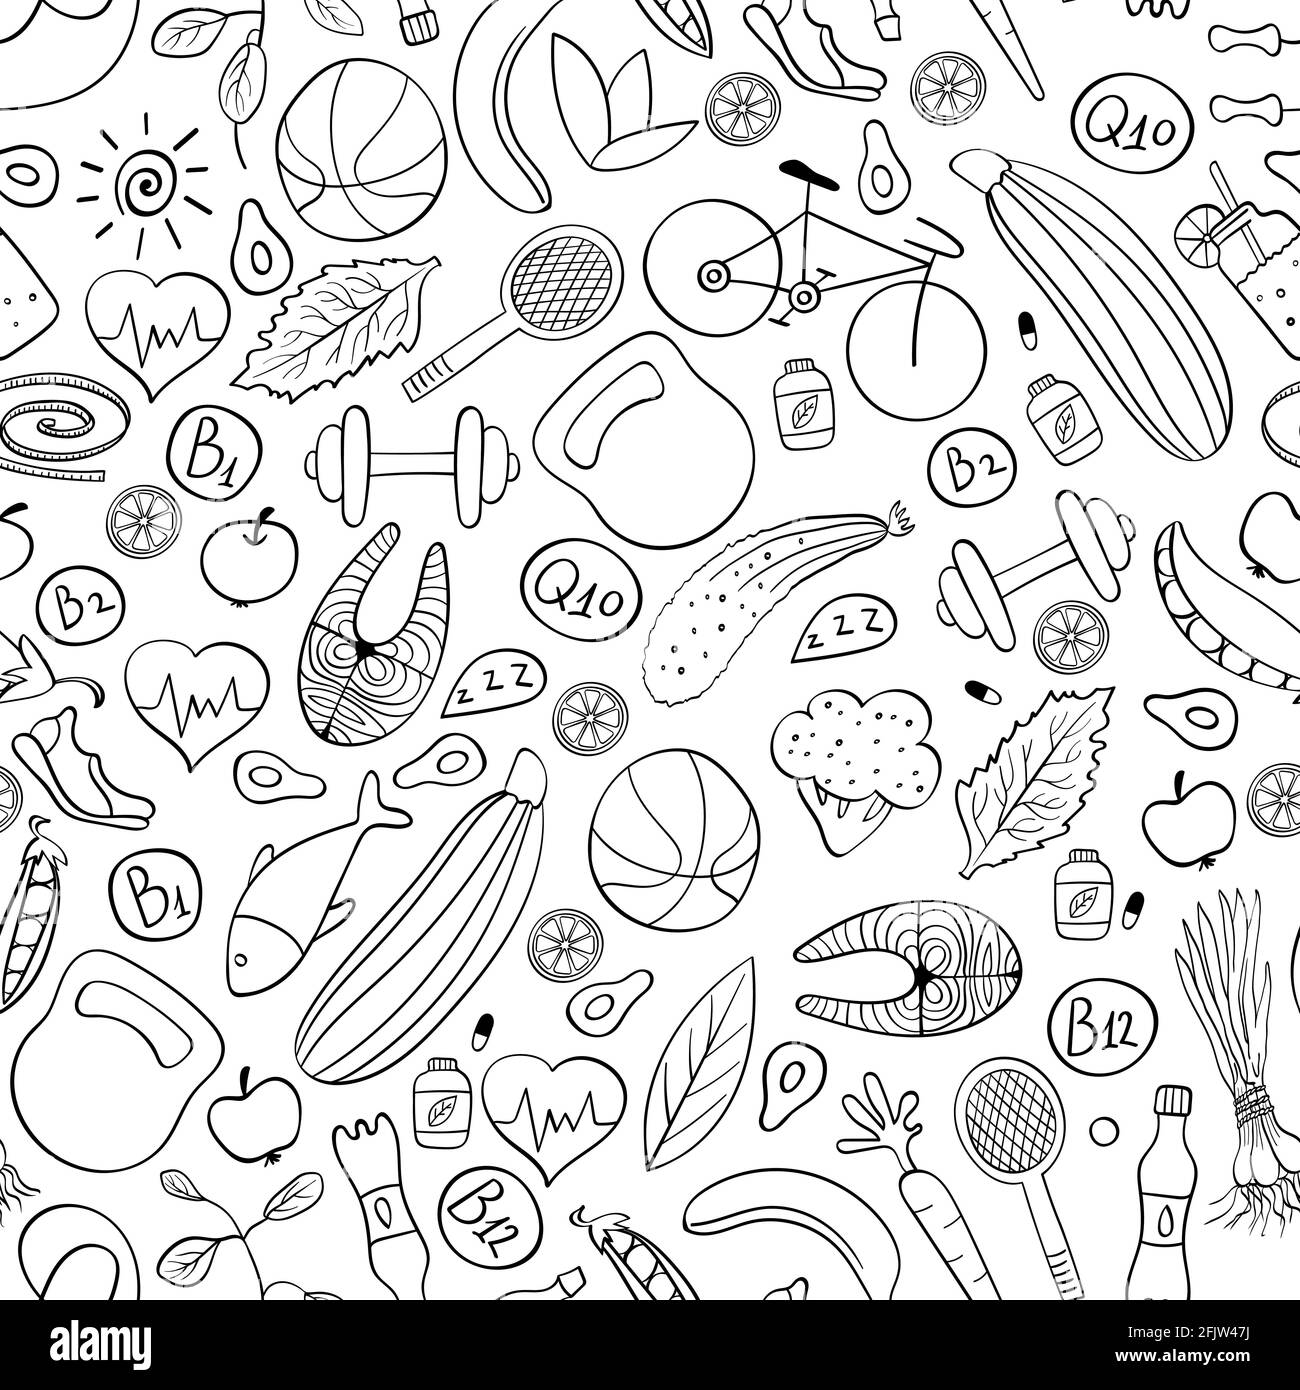 Healthy lifestyle seamless pattern. Black doodles on white background. Vector illustration. Stock Vector